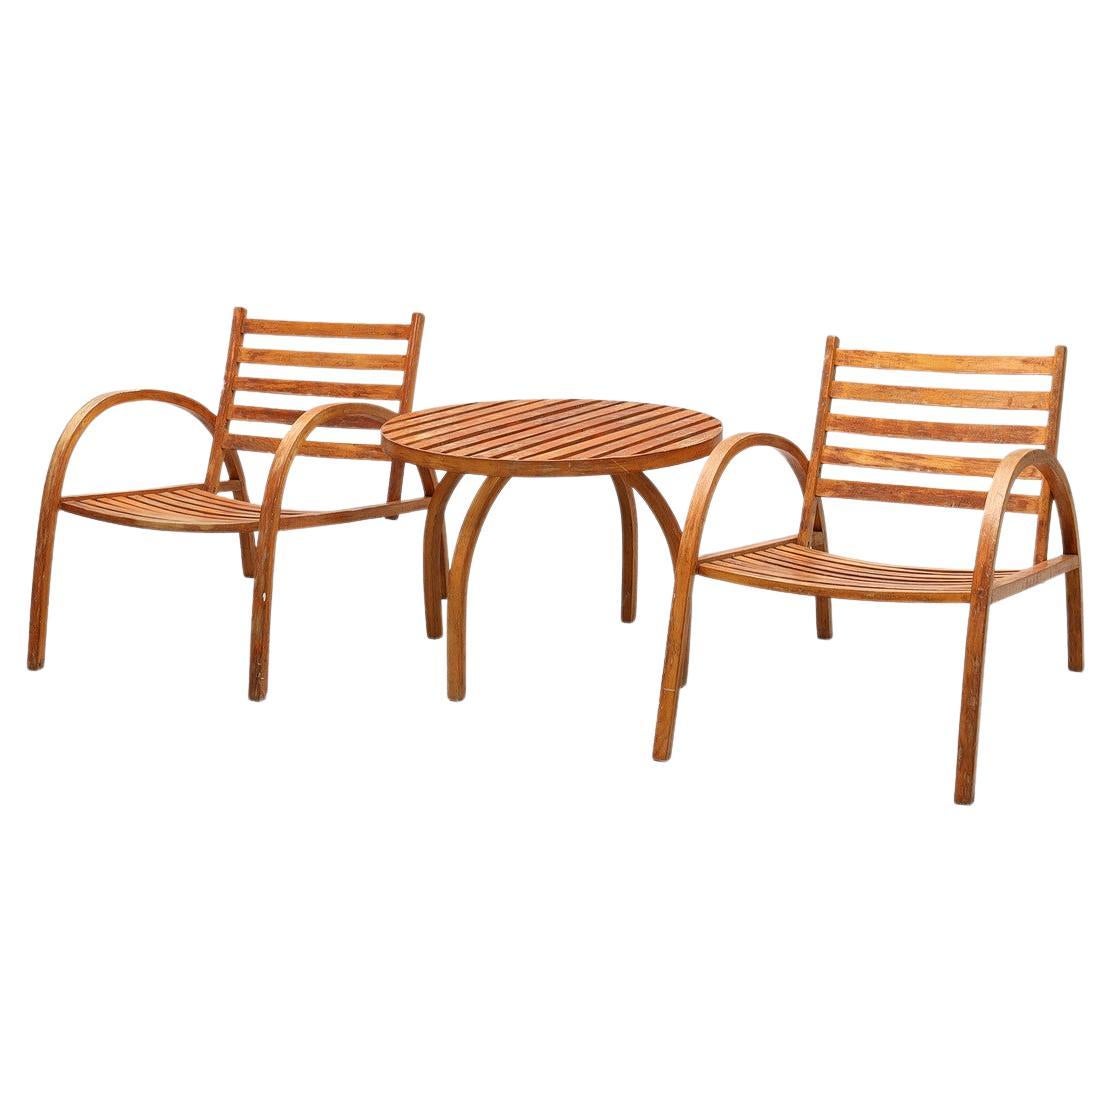 Modernist wooden garden set of furniture pair of chairs and table 1930's